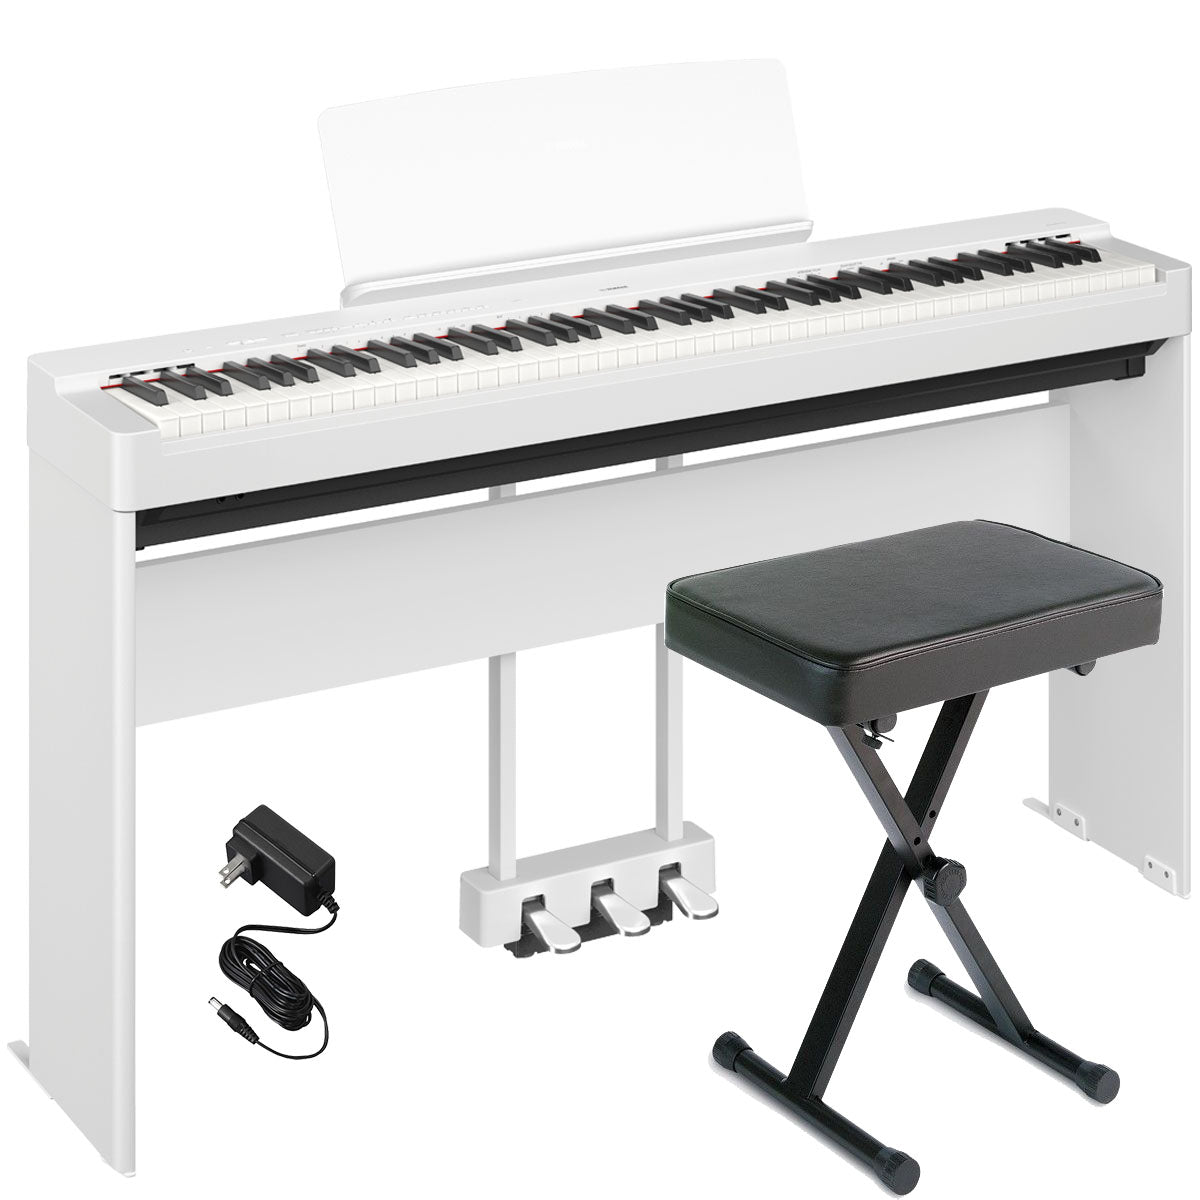 L-200 Stand for P-225 Electric/Digital Piano - Yamaha USA